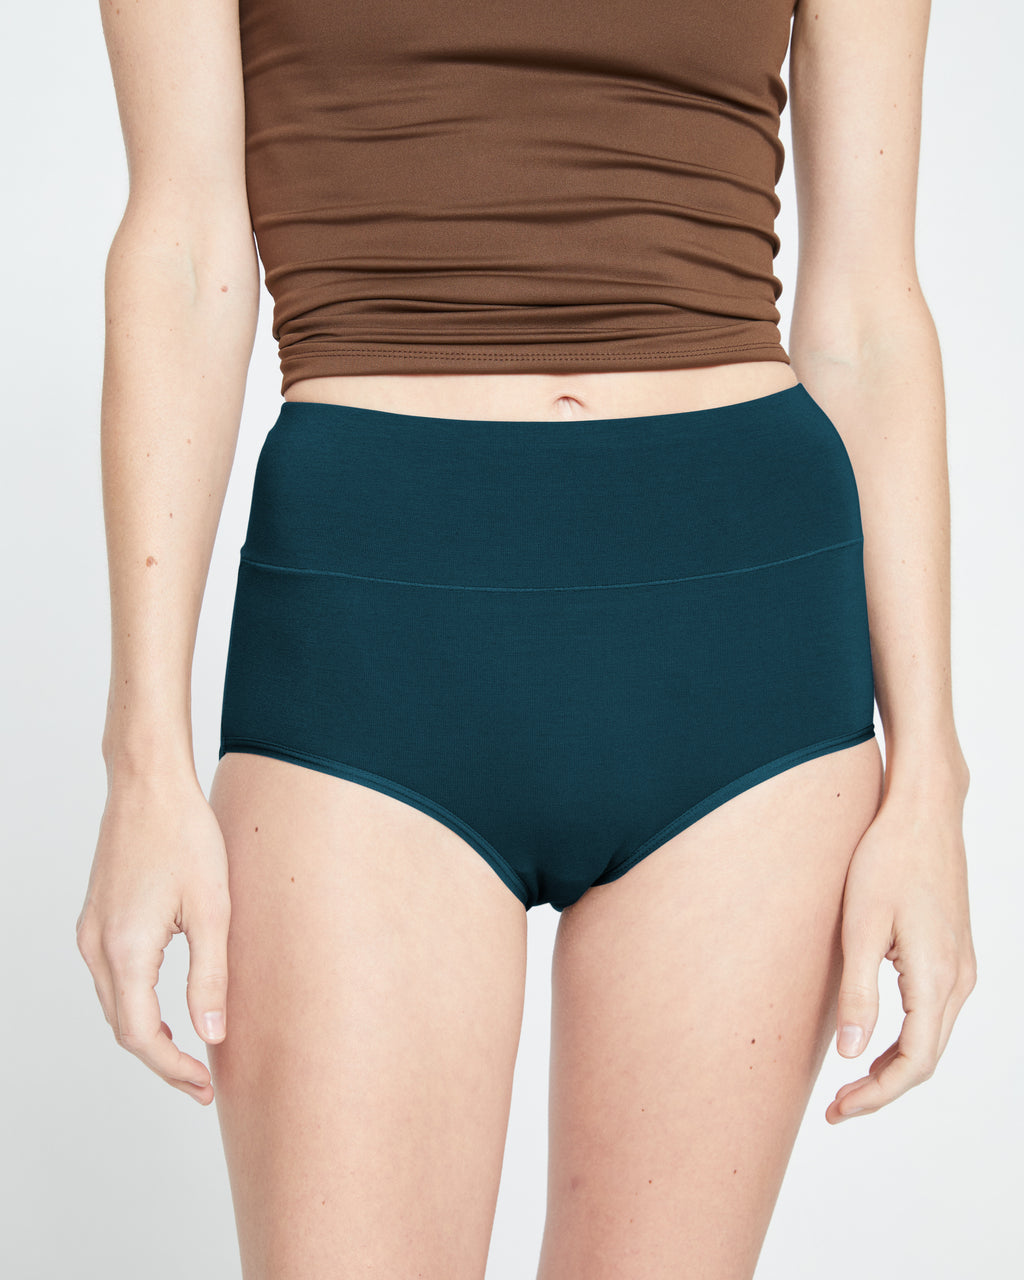 Barely-There Slip Shorts - Spice